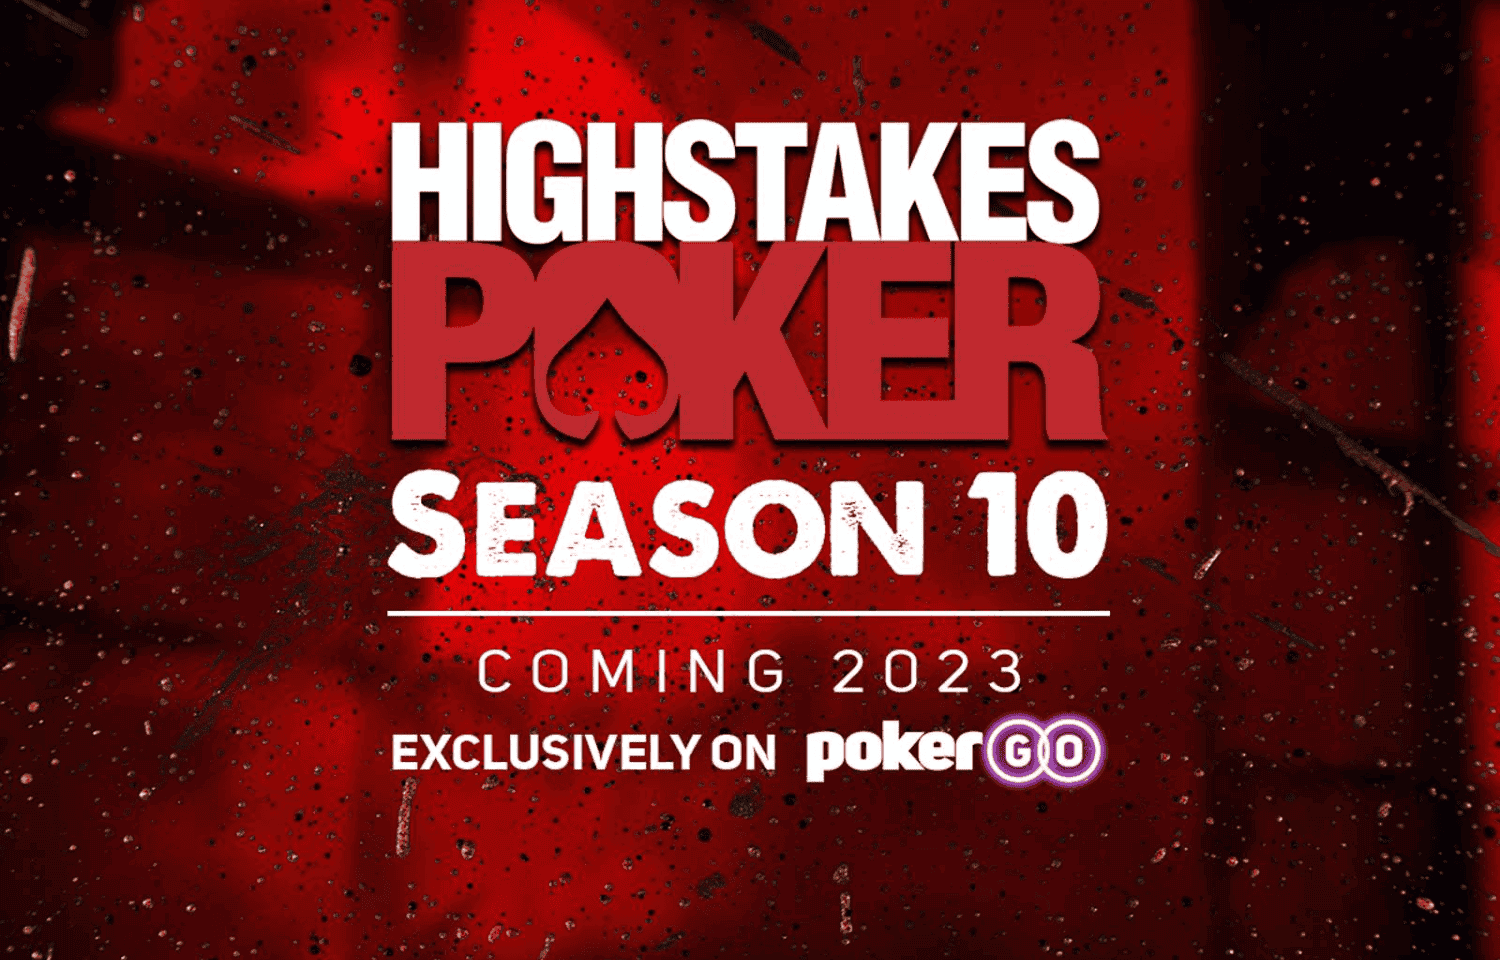 How To Watch High Stakes Poker Season 10 Episodes